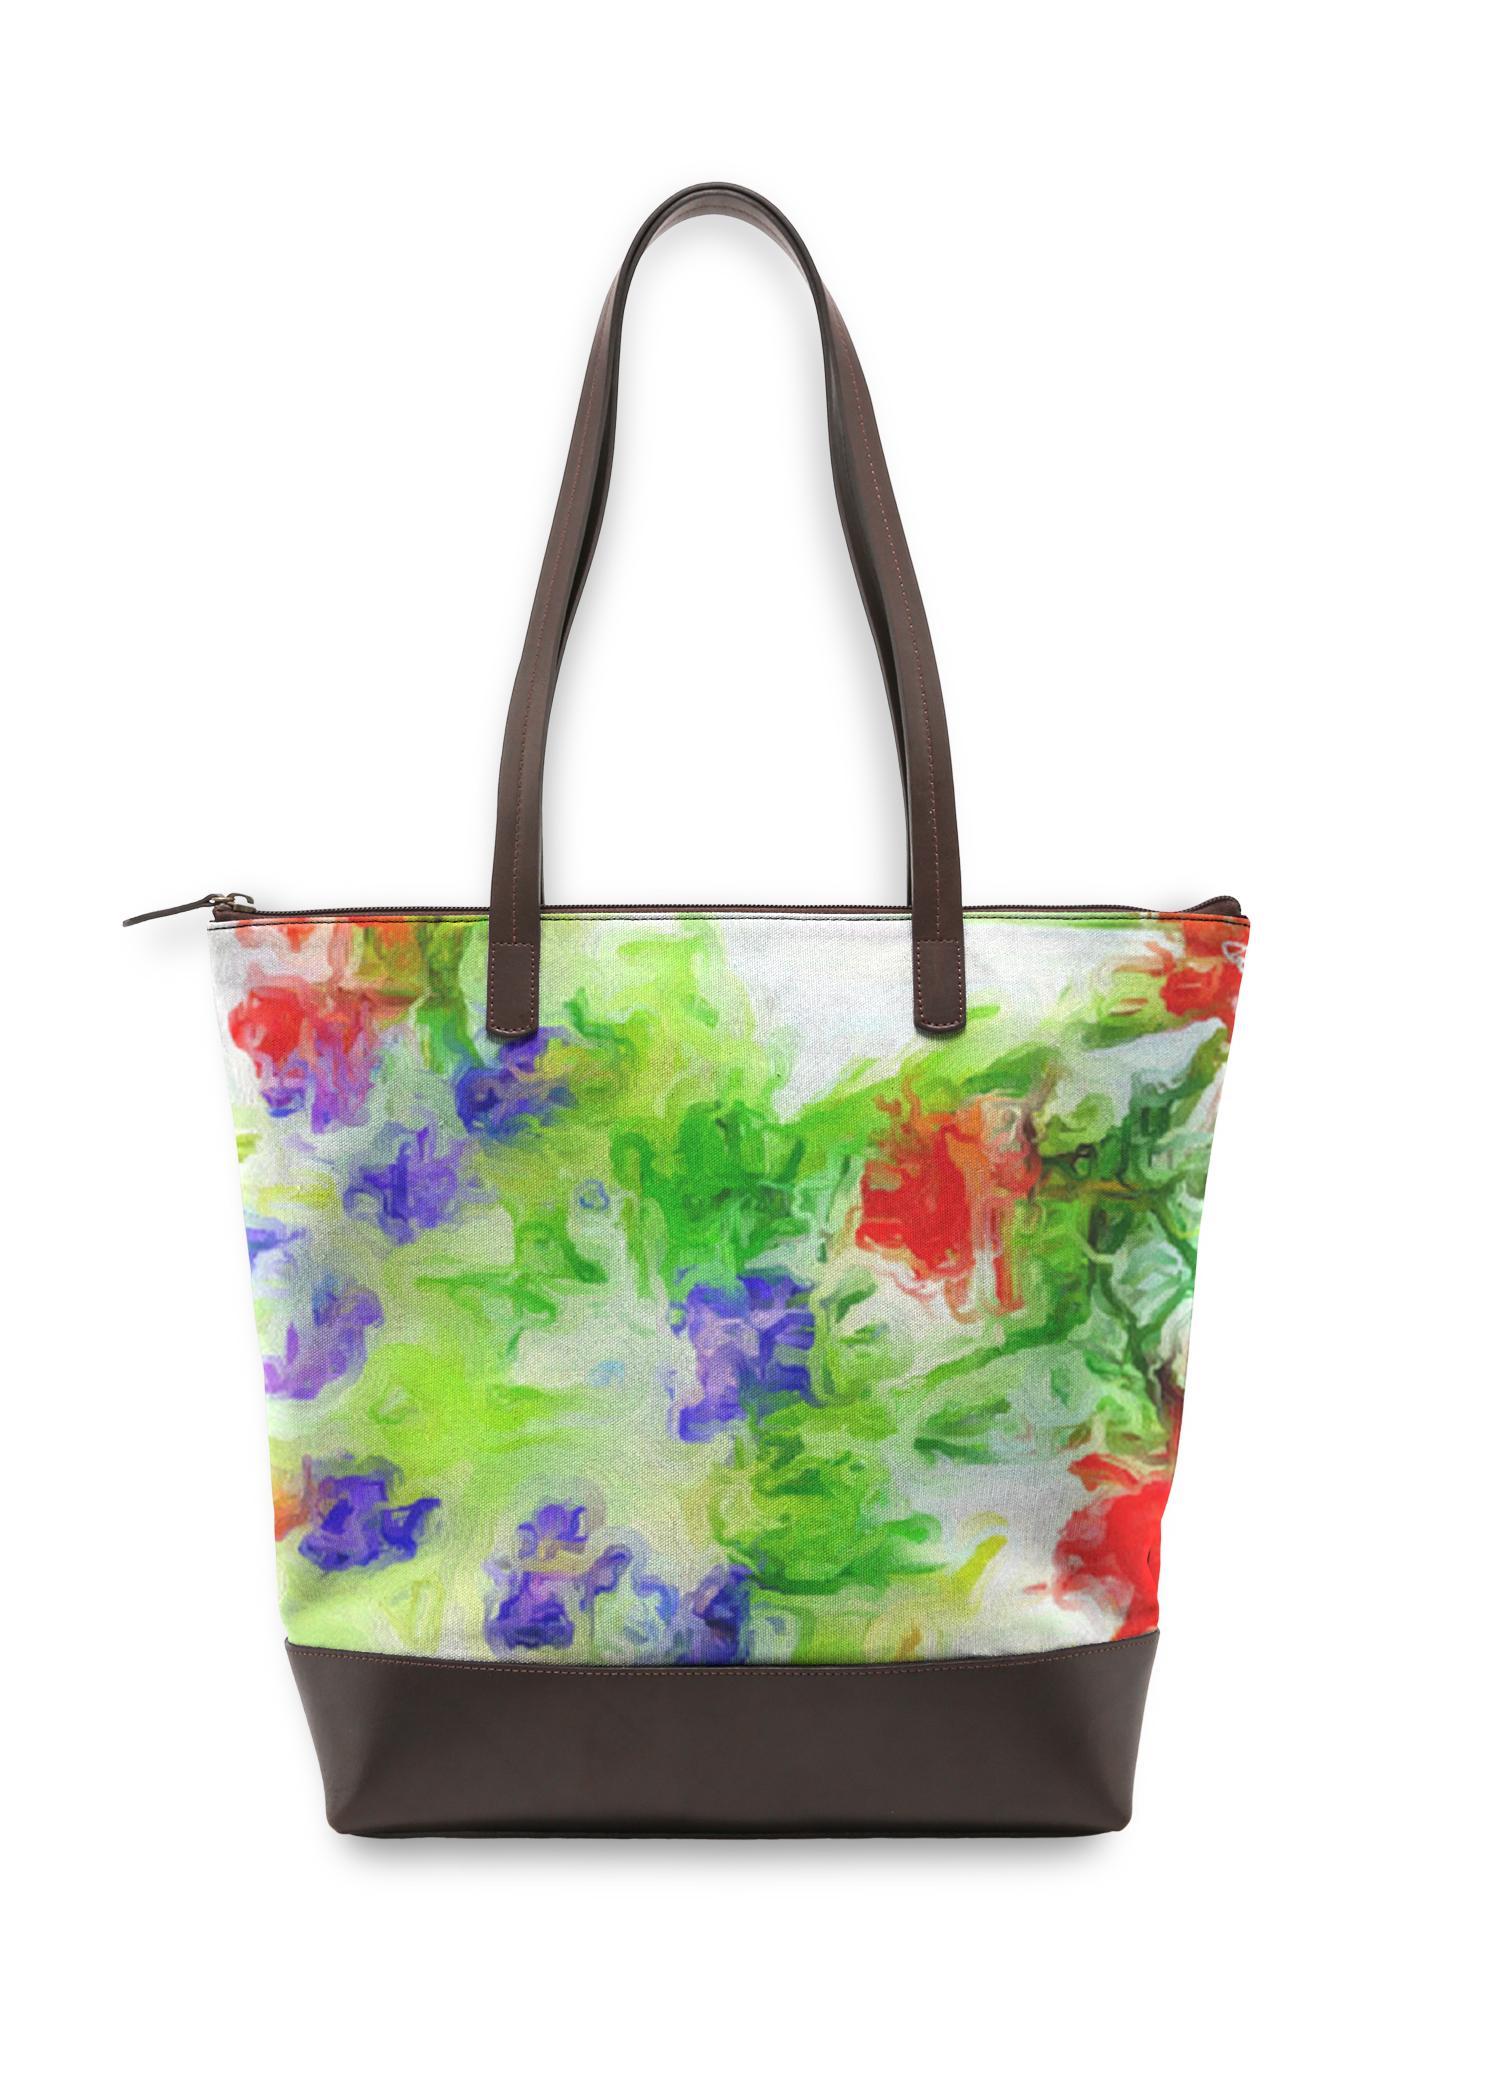 "Early Spring" Statement Bag